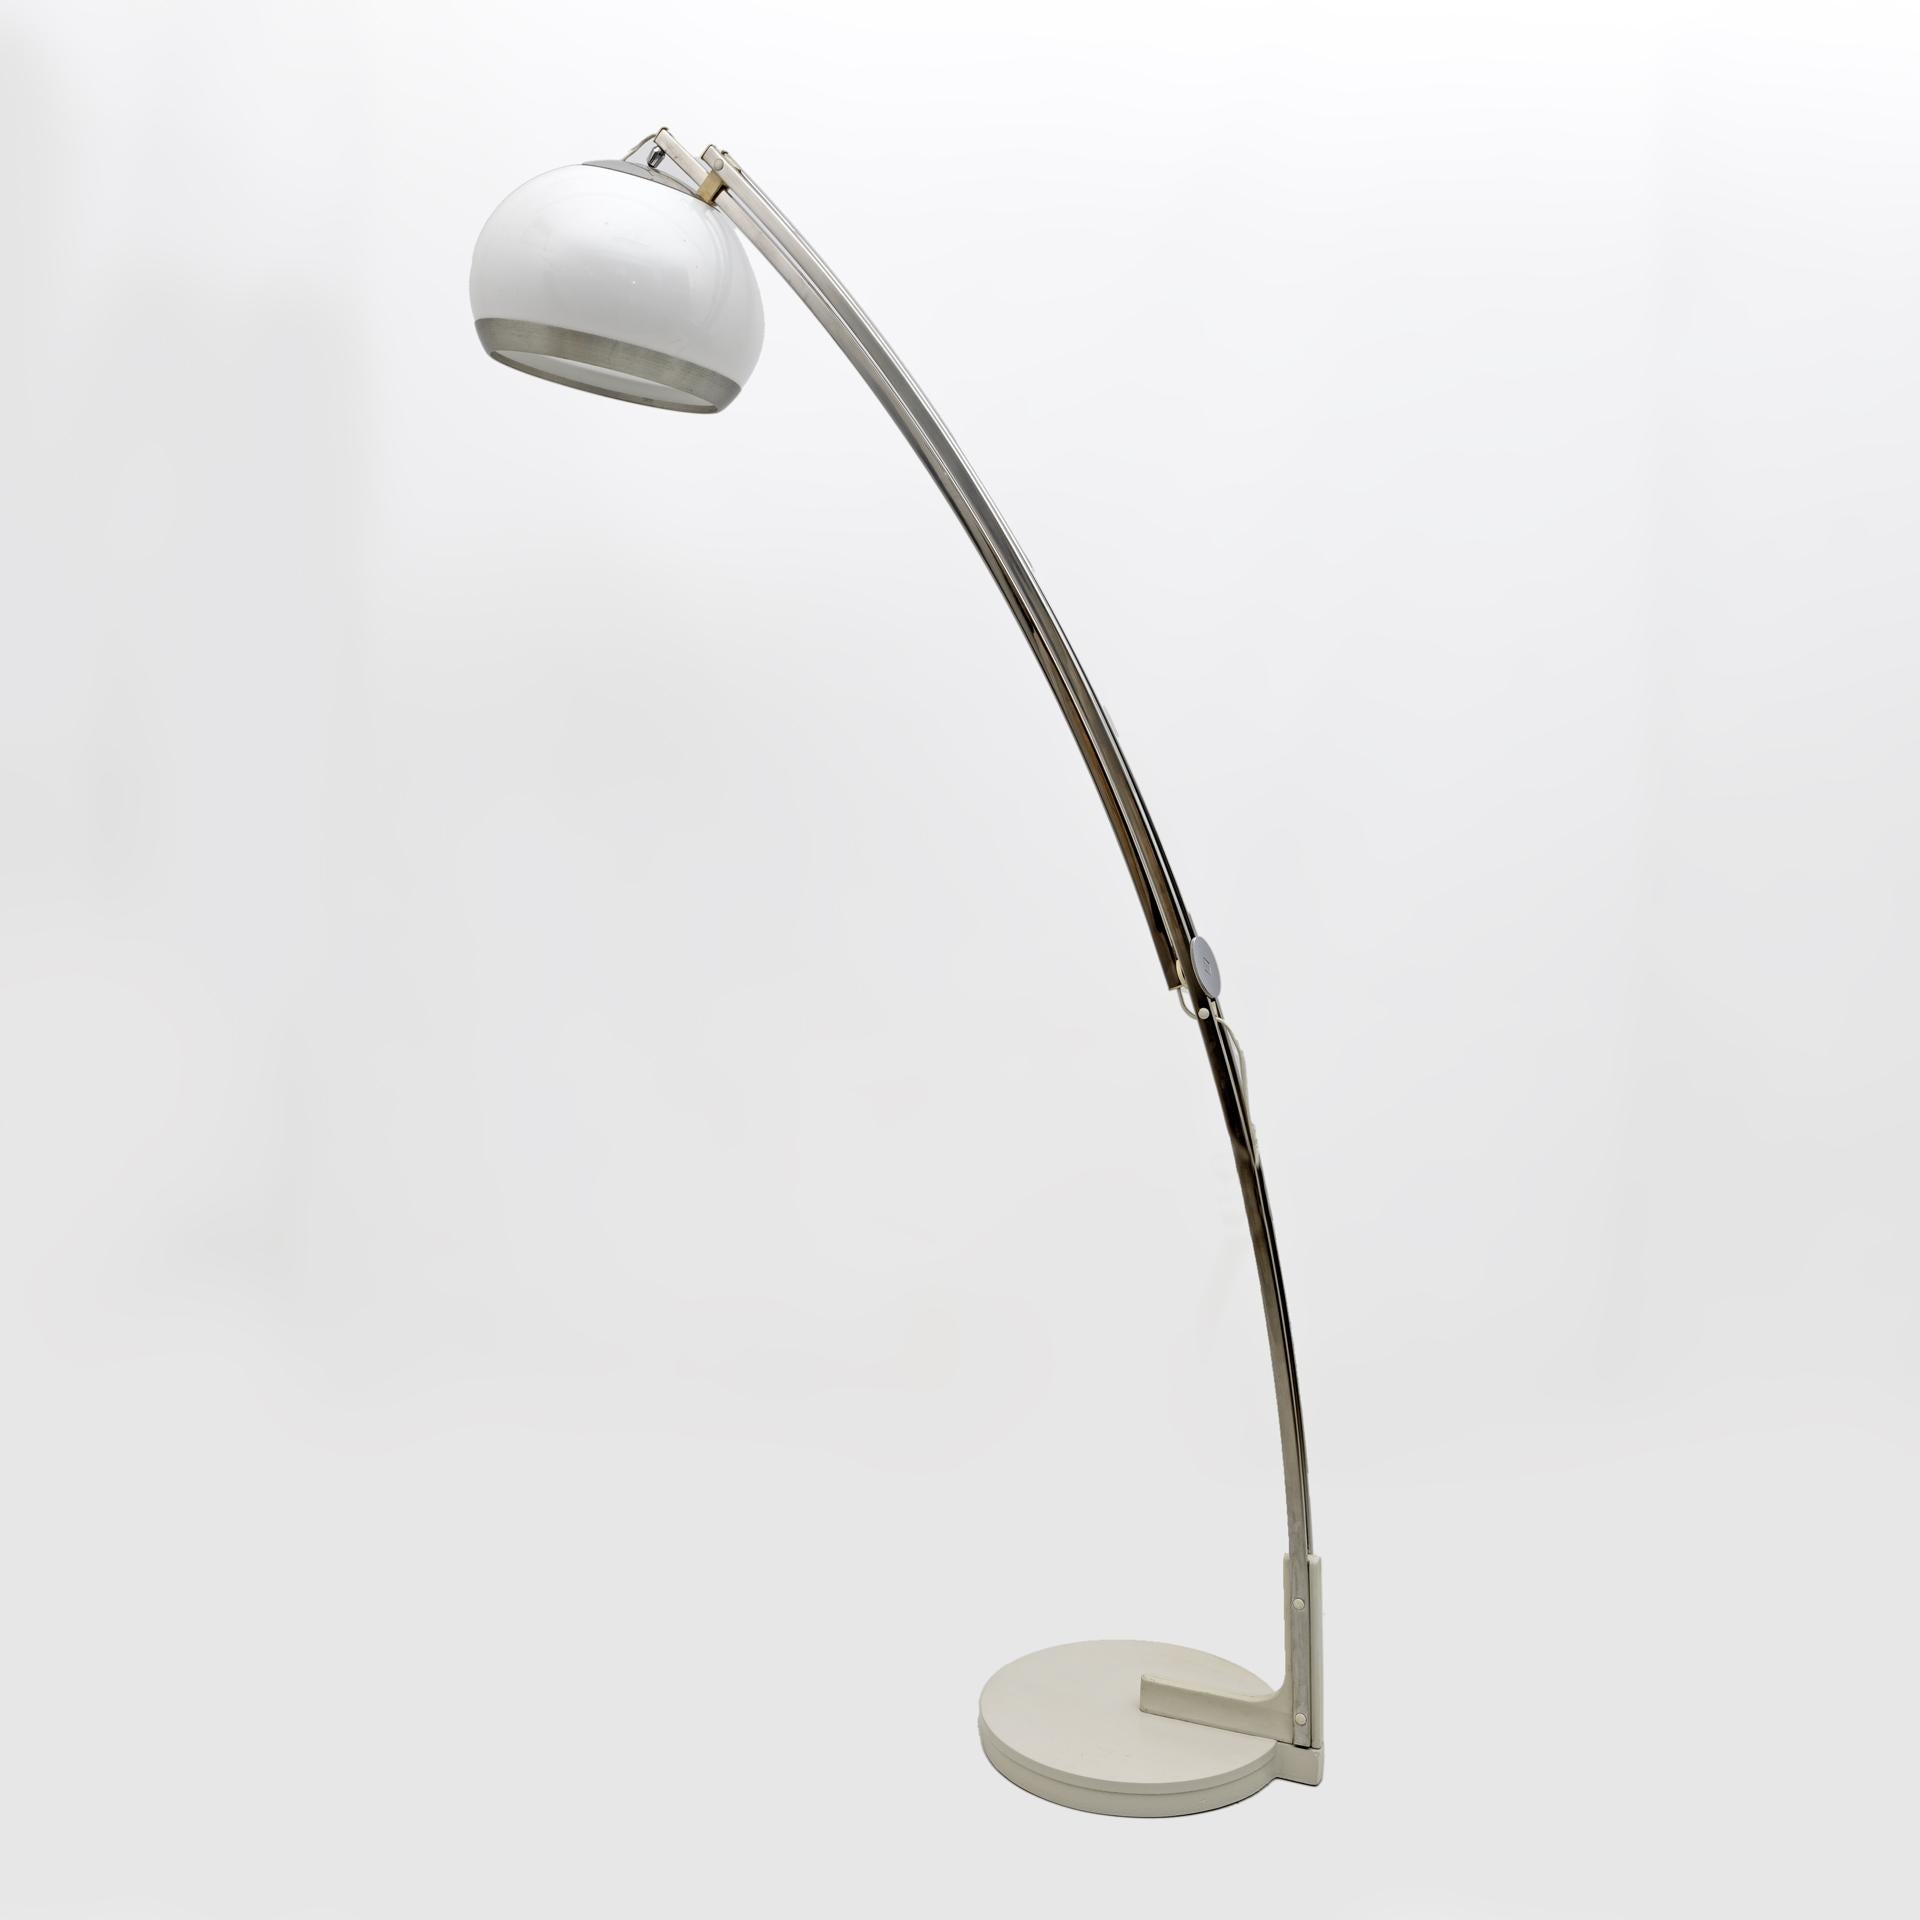 Beautiful adjustable arch floor lamp, the elongated lamp reaches a maximum height of 190 to 230 cm and a maximum depth of 110 to 190 cm. Curved chromed metal upright, cast iron base and Perspex lampshade. In excellent condition. Design Goffredo